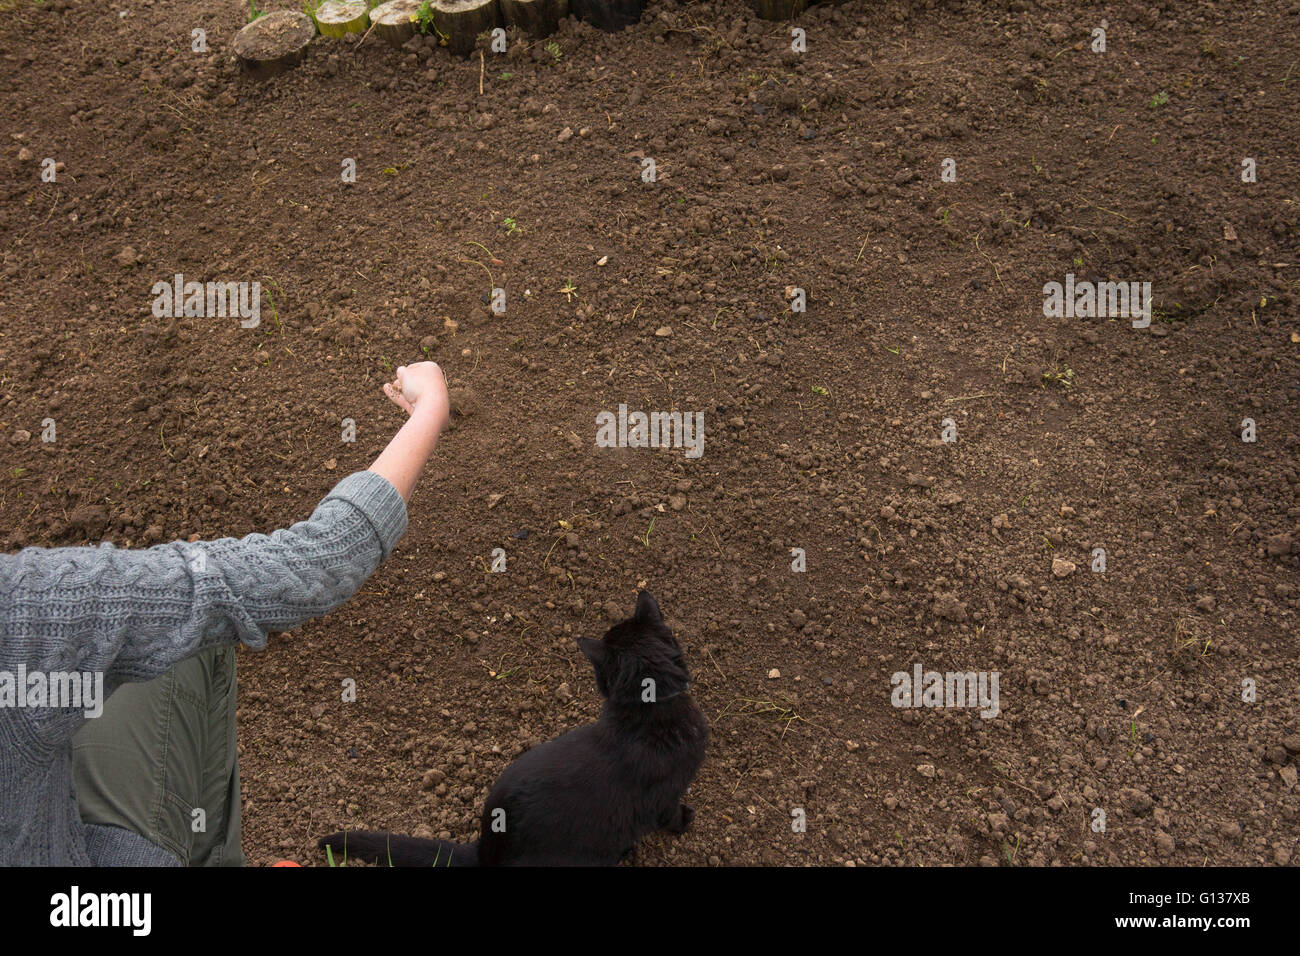 Sowing wildflower seeds with help form the cat Stock Photo